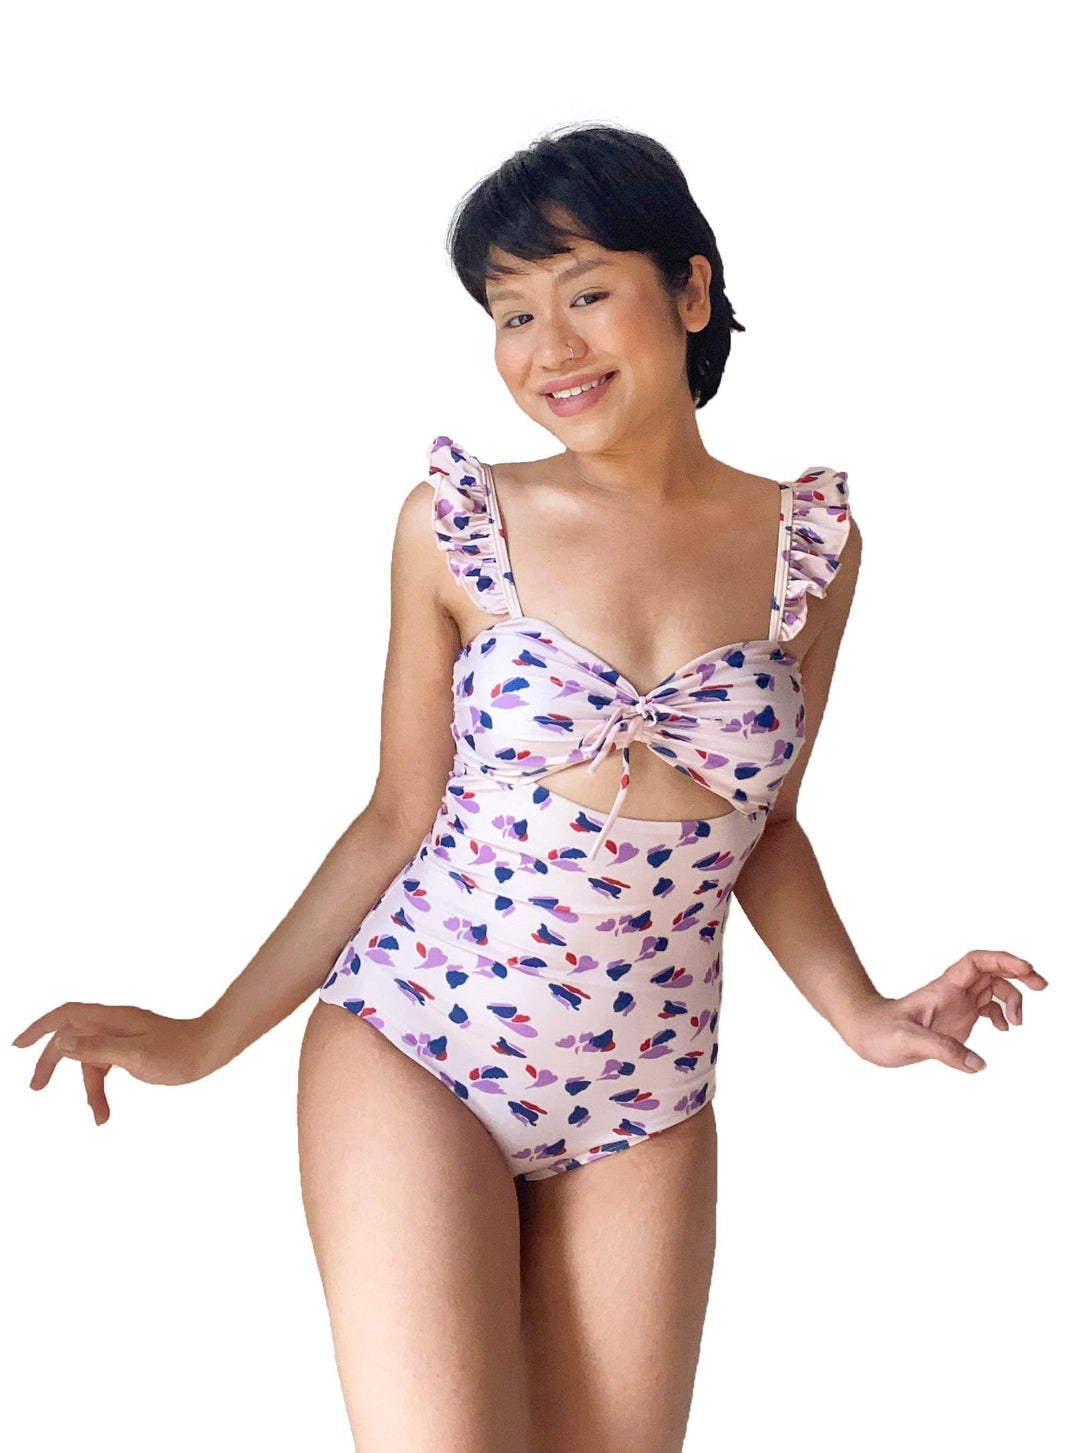 Ceres Pastel Ruffle Cut Out Swimsuit in Pink Purple - Pink N' Proper